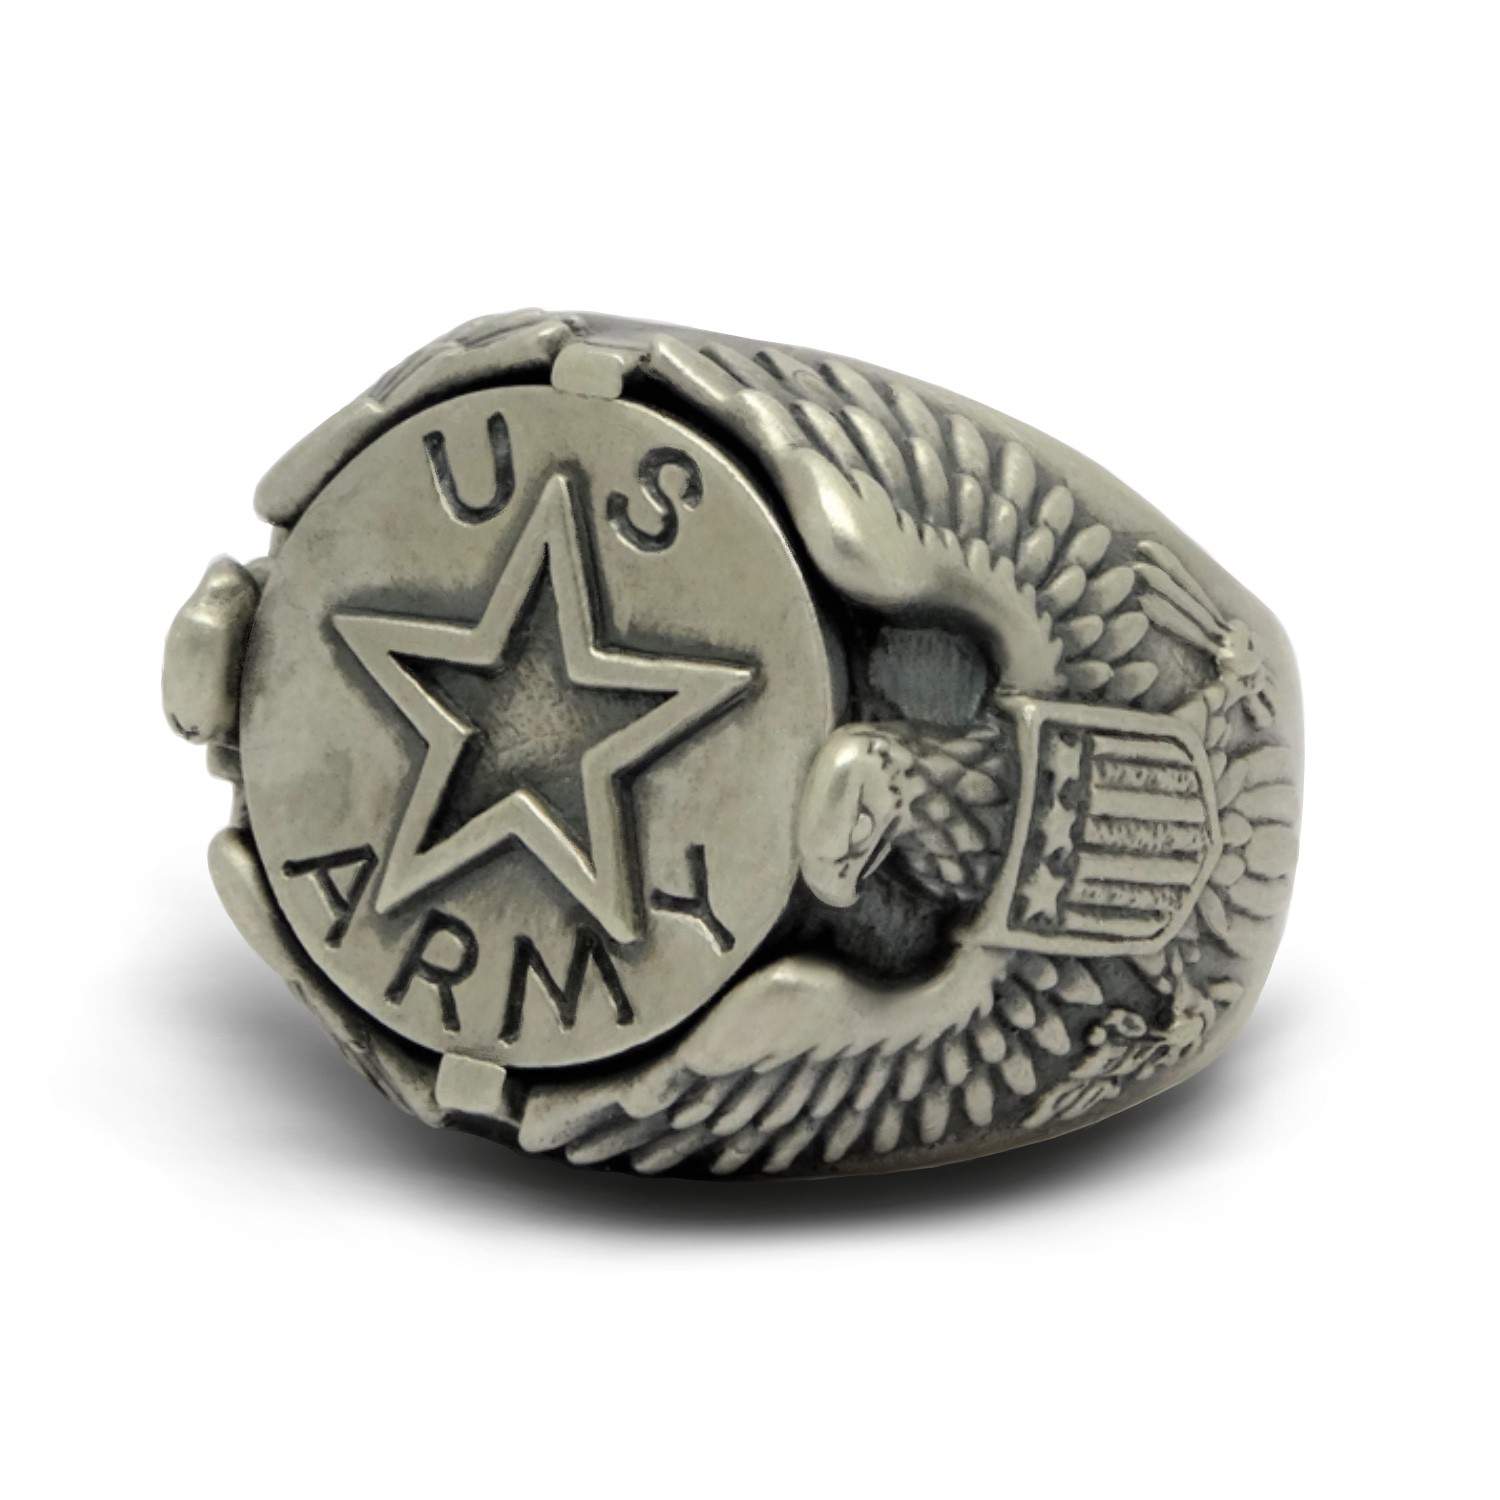 Details about   925 Sterling Silver United States Army Military March Aqua Men's Ring Size 7 